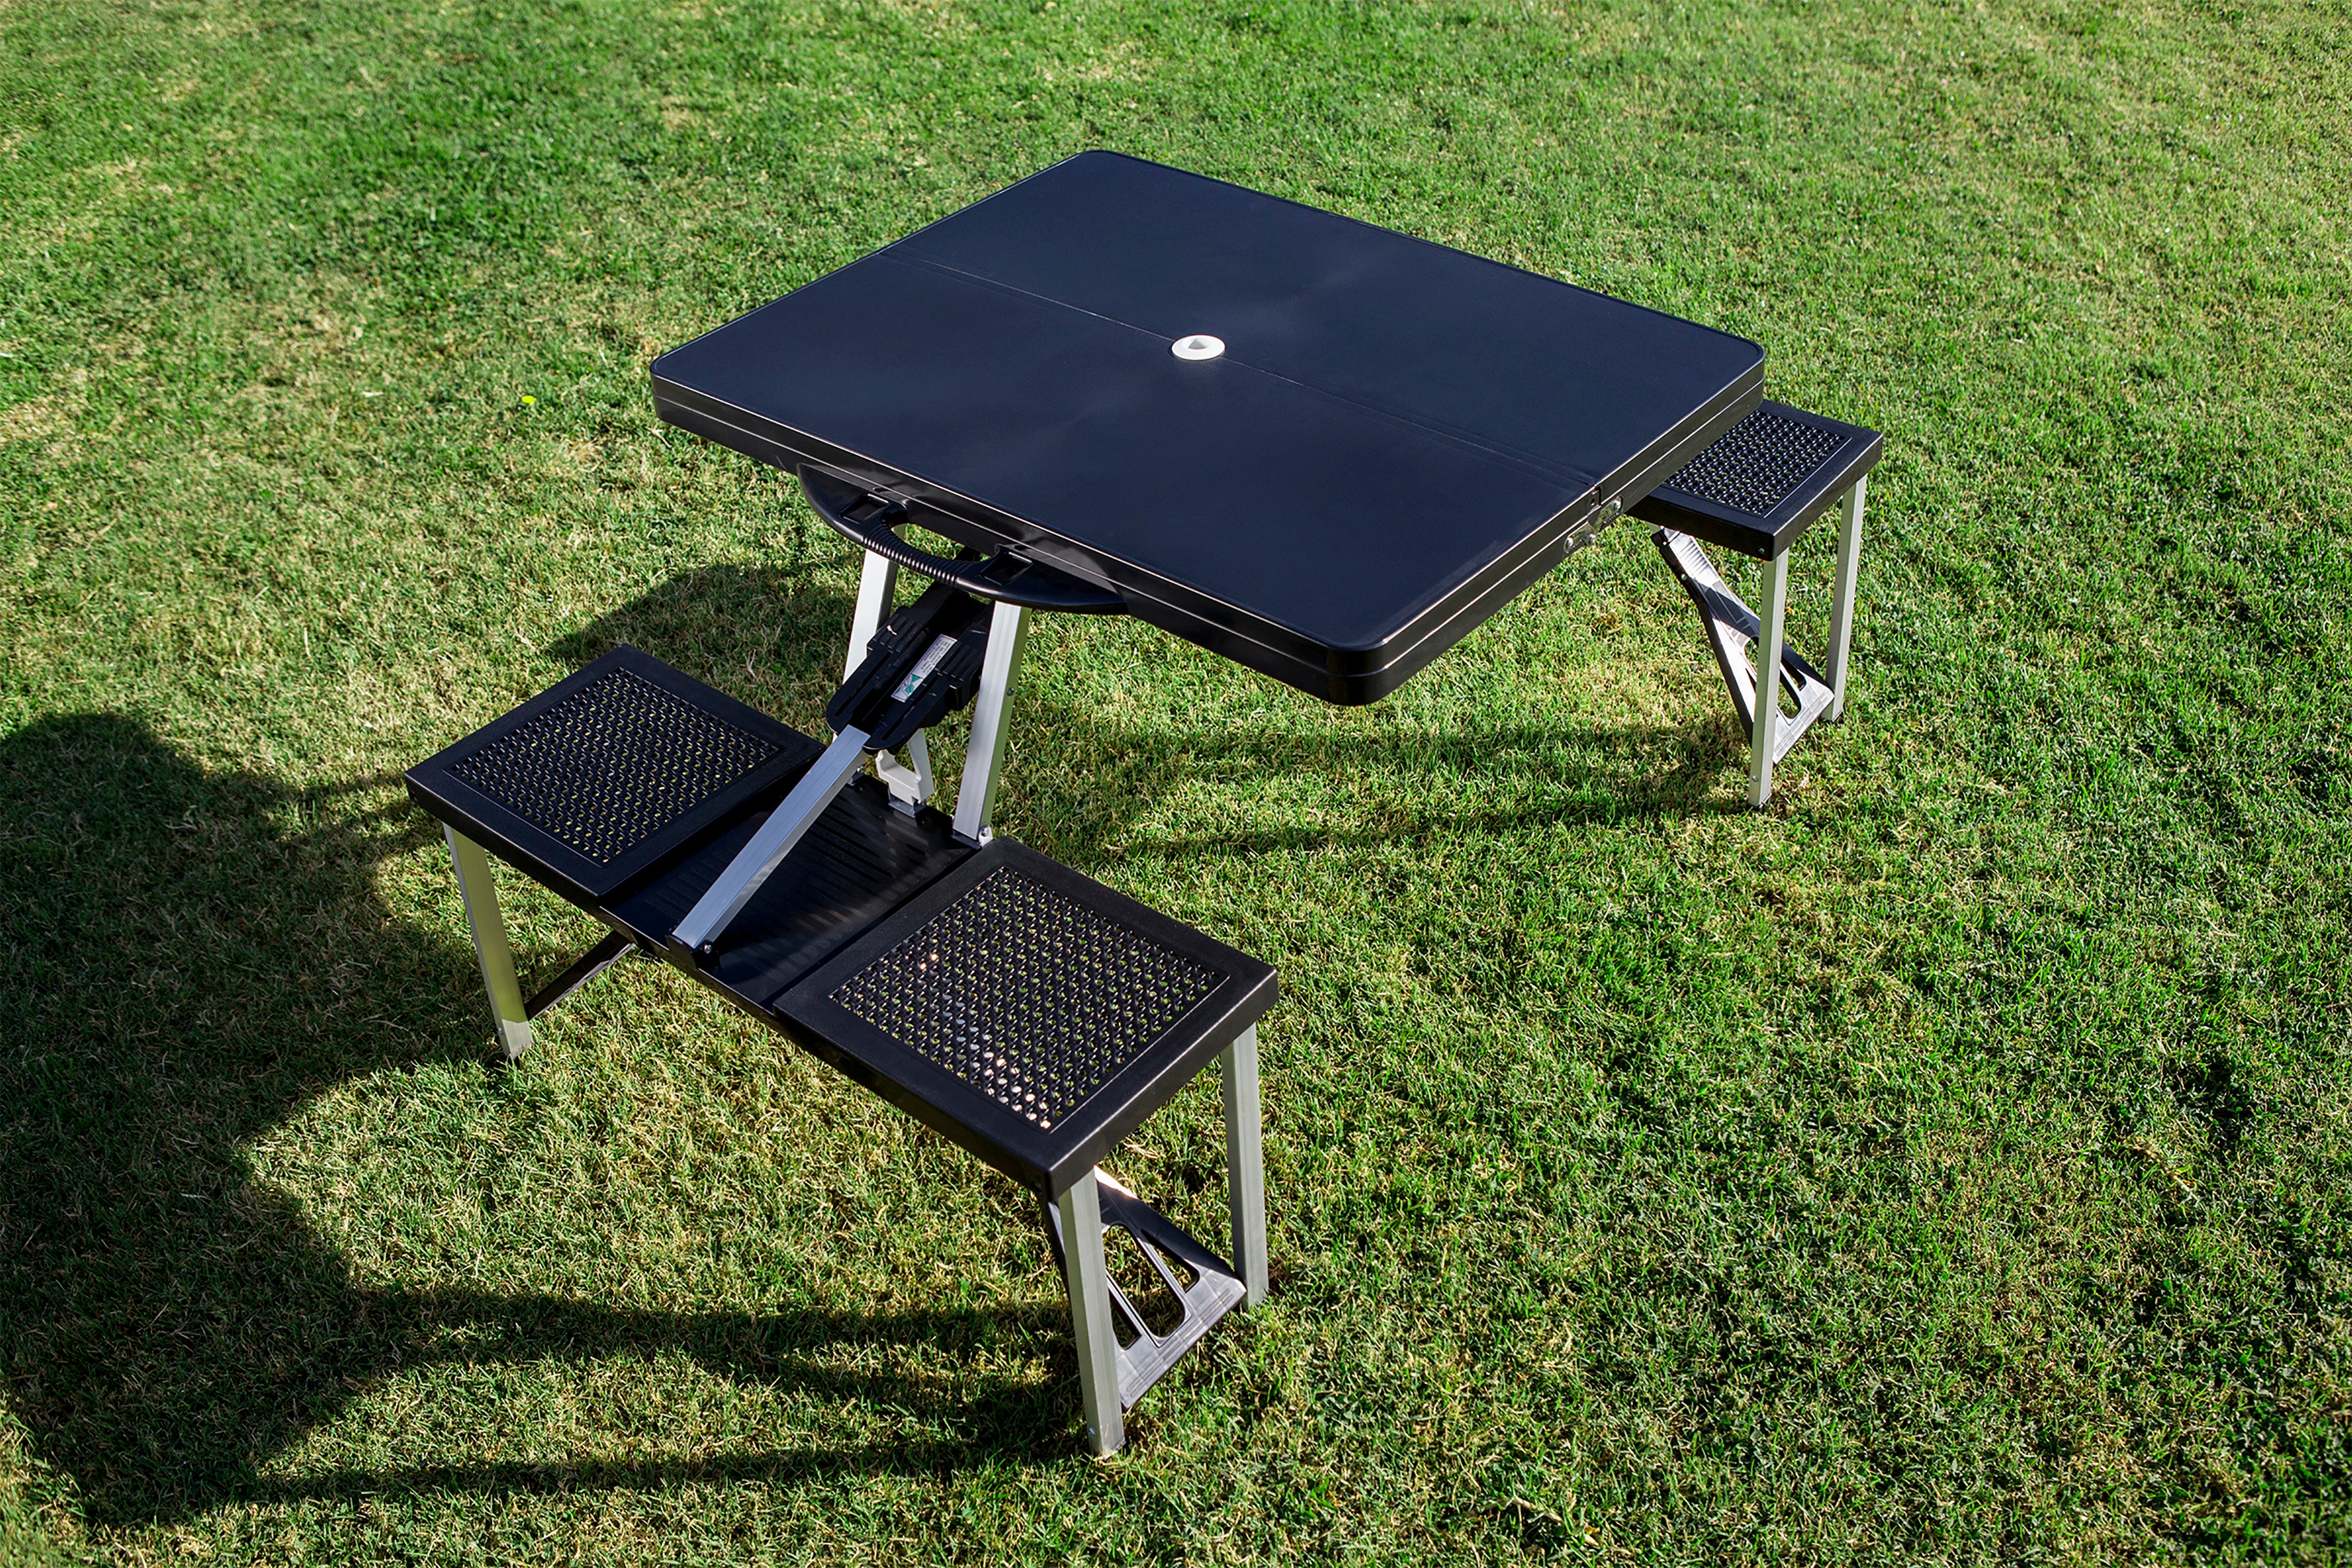 Cleveland Browns Football Field - Picnic Table Portable Folding Table with Seats